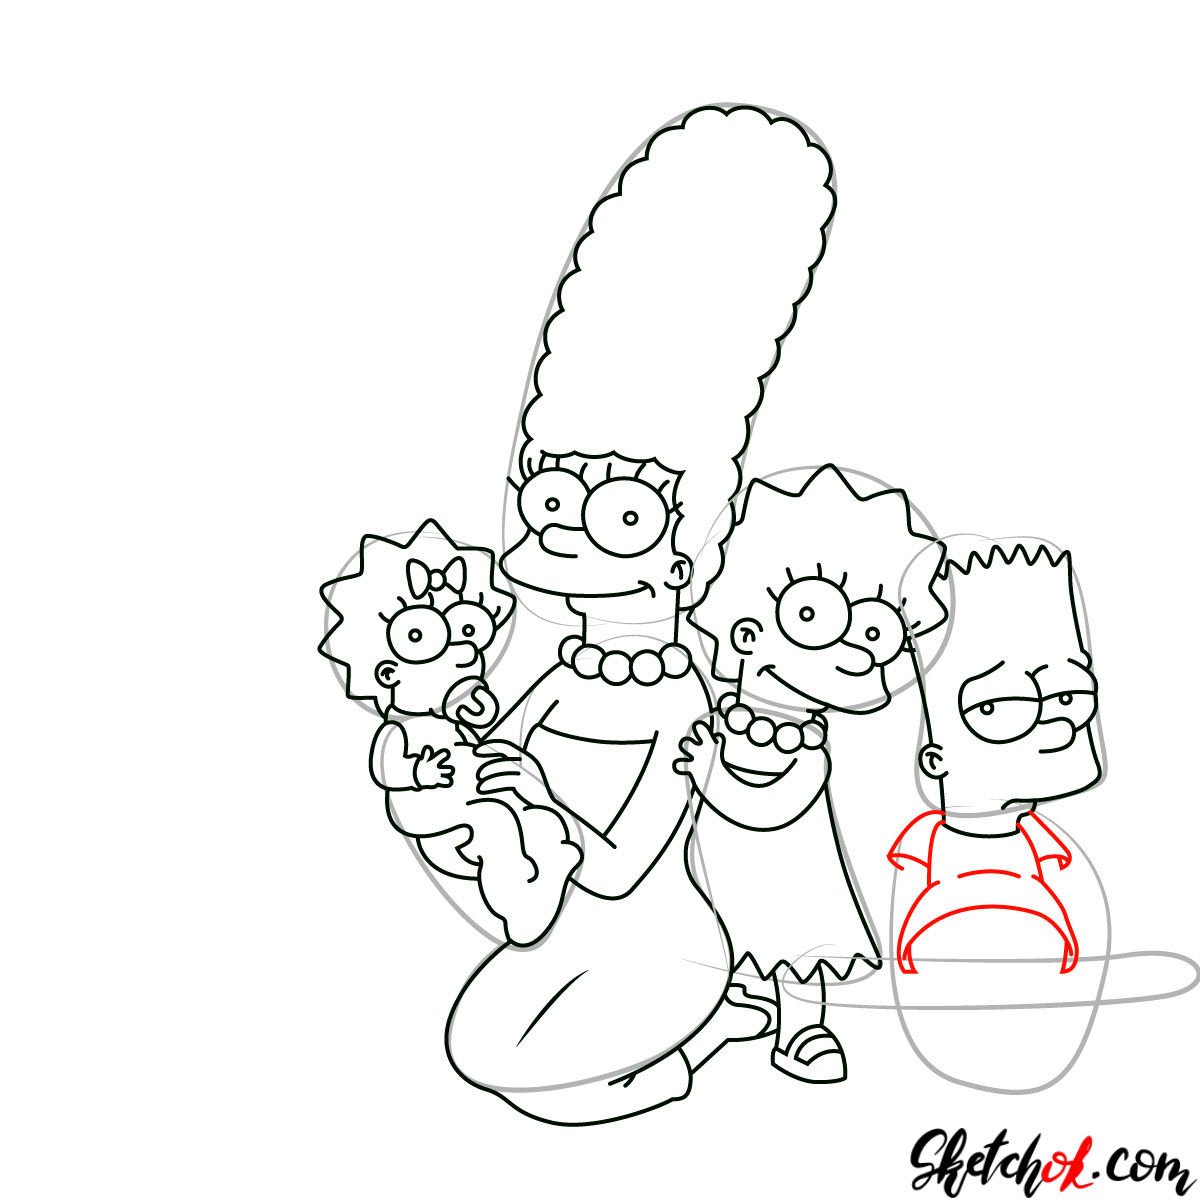 How to draw the Simpsons Family - step 18